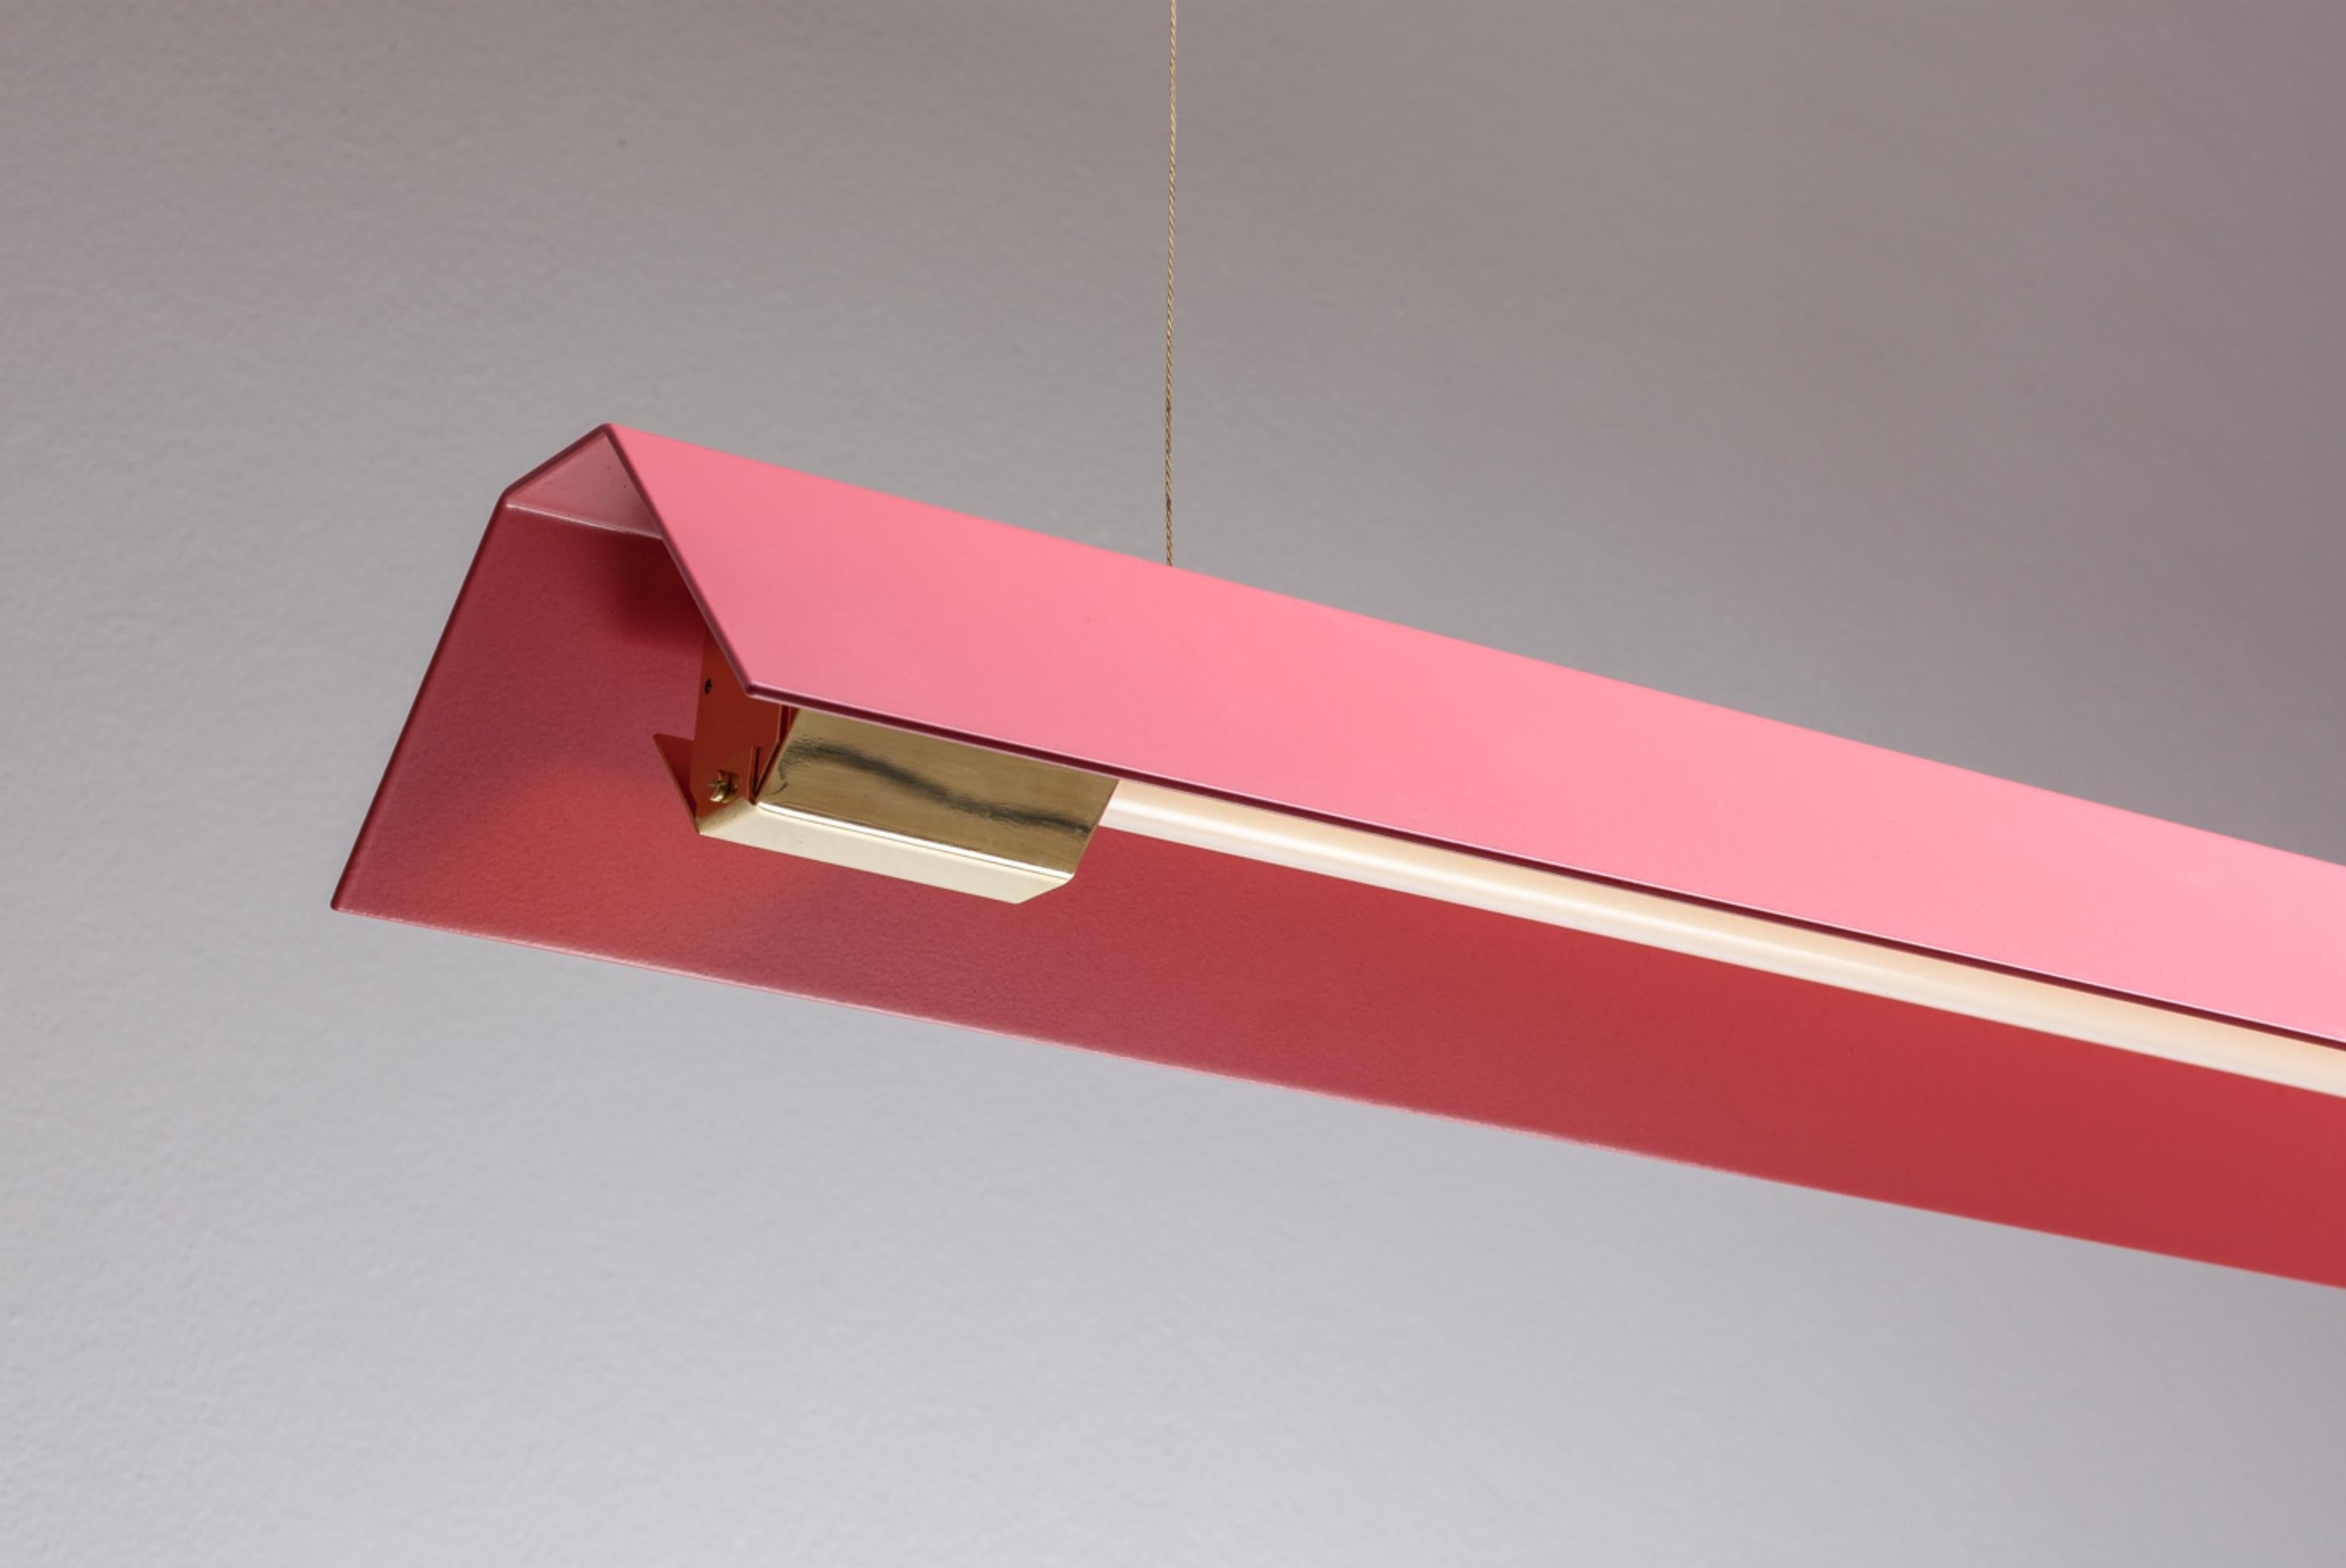 Small Misalliance Ex antique pink suspended light by Lexavala
Dimensions: D 16 x W 70 x H 8 cm
Materials: powder coated shade with details made of brass or stainless steel.

There are two lenghts of socket covers, extending over the LED. Two